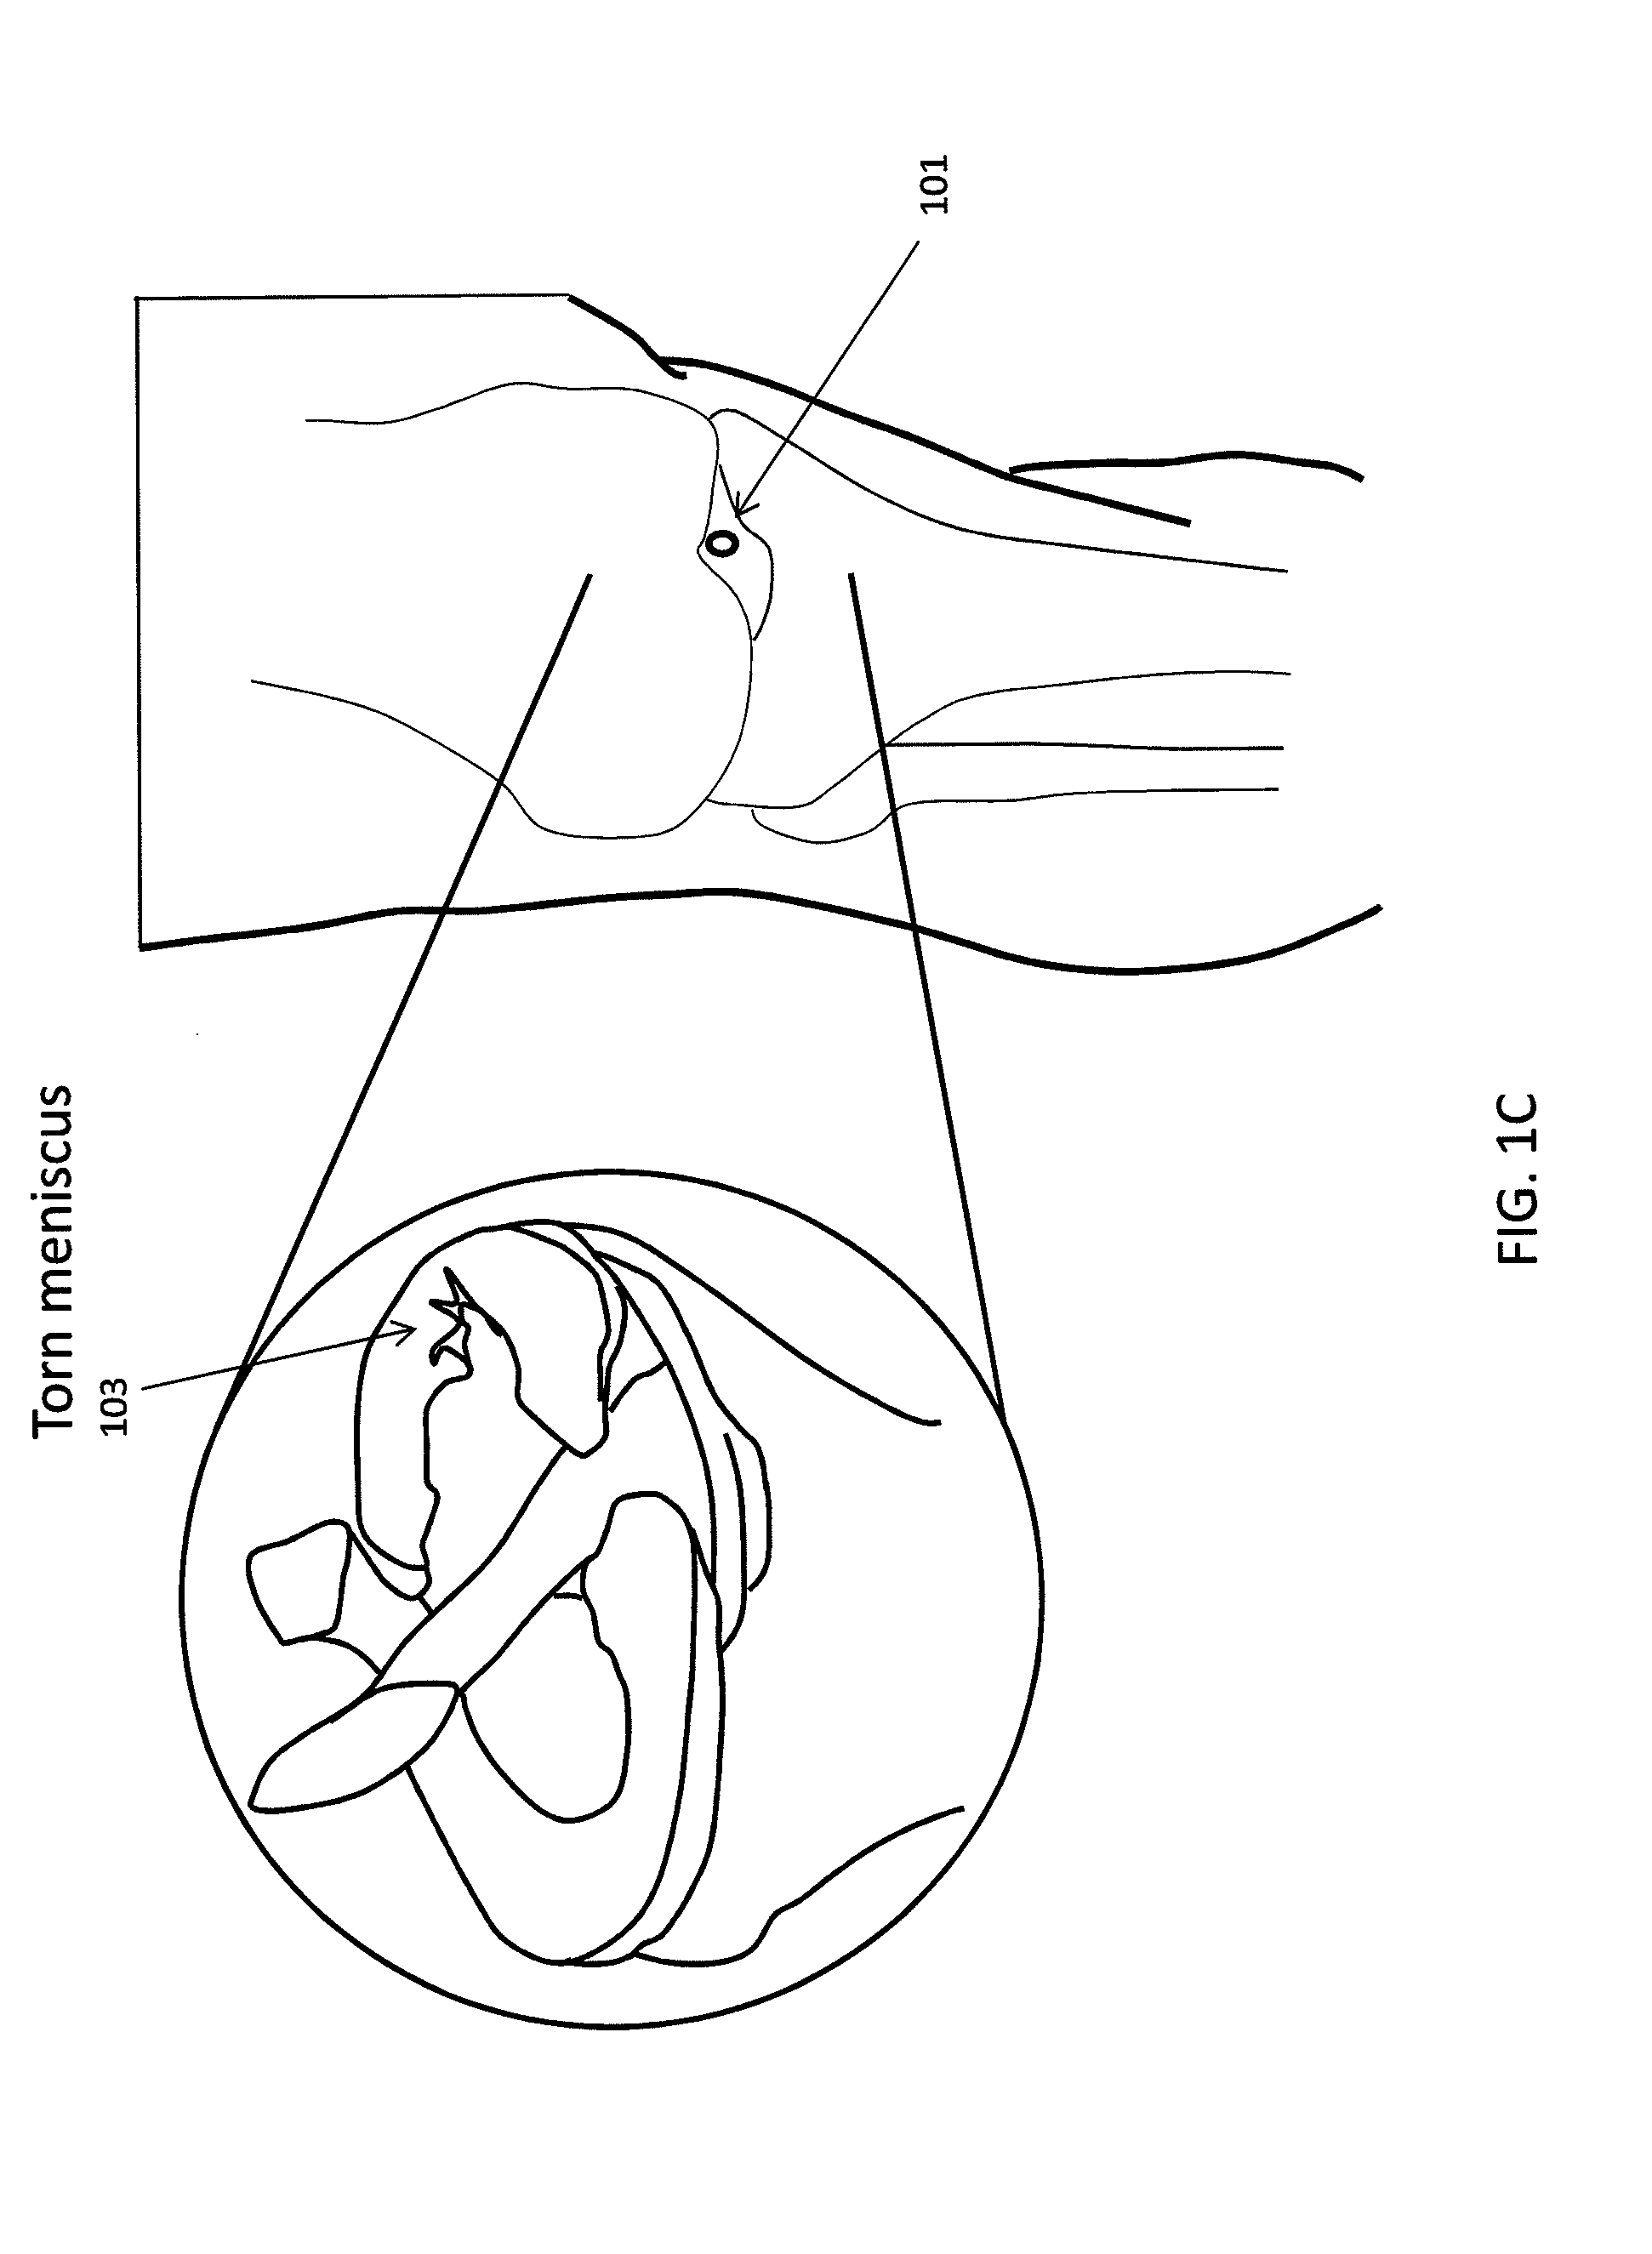 Methods and devices for preventing tissue bridging while suturing